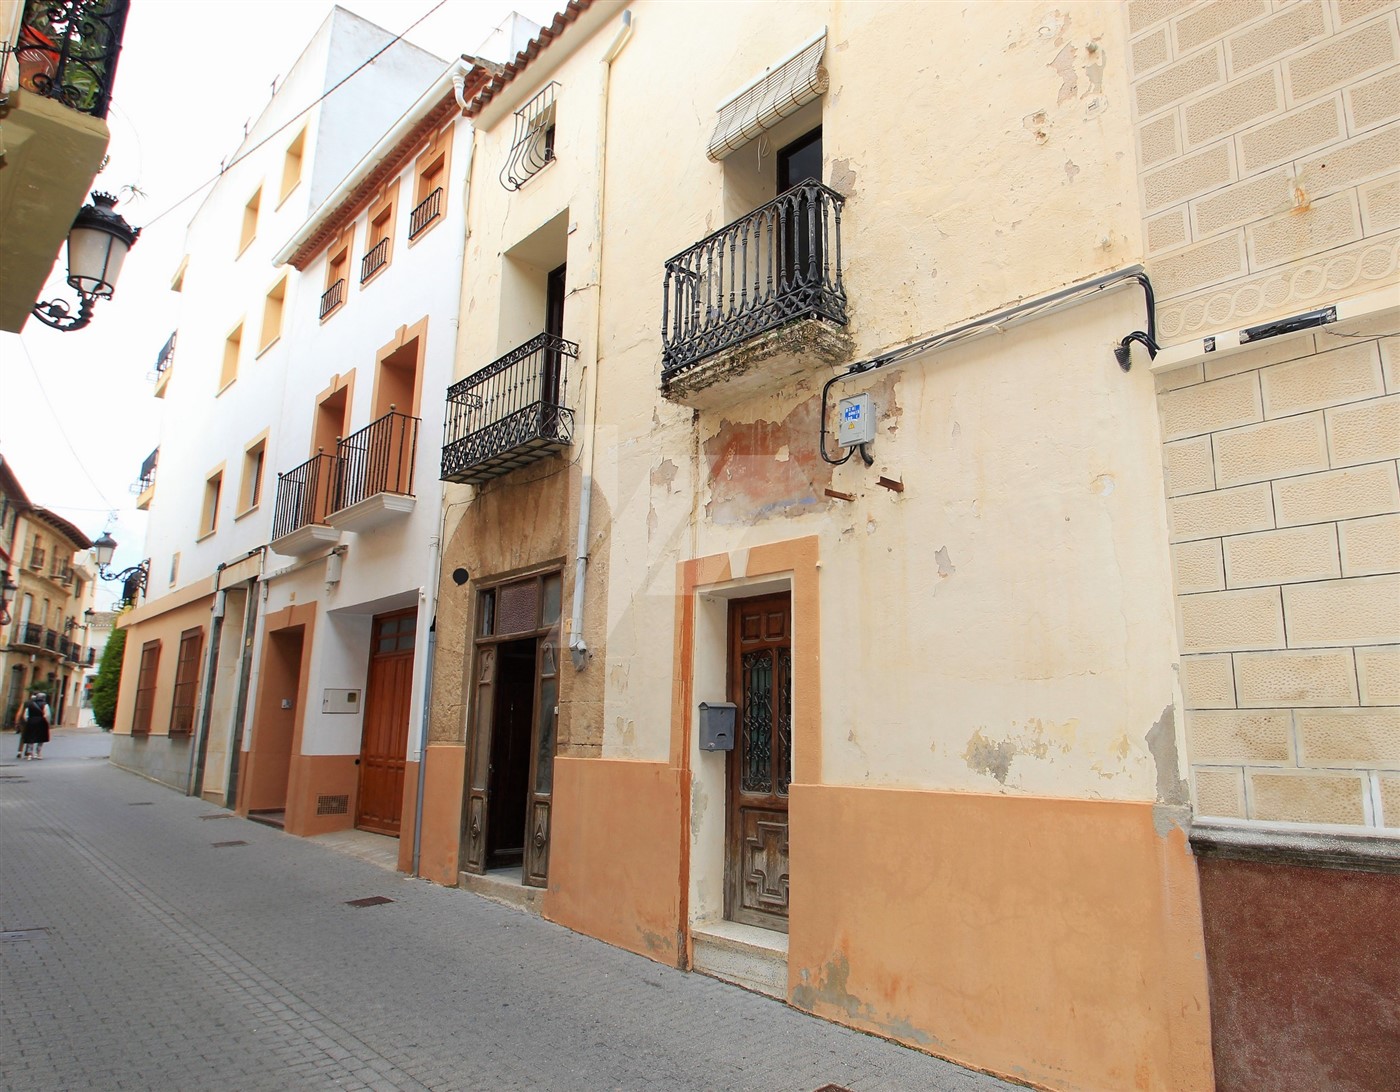 Townhouse for sale in Teulada, Costa Blanca, Spain.